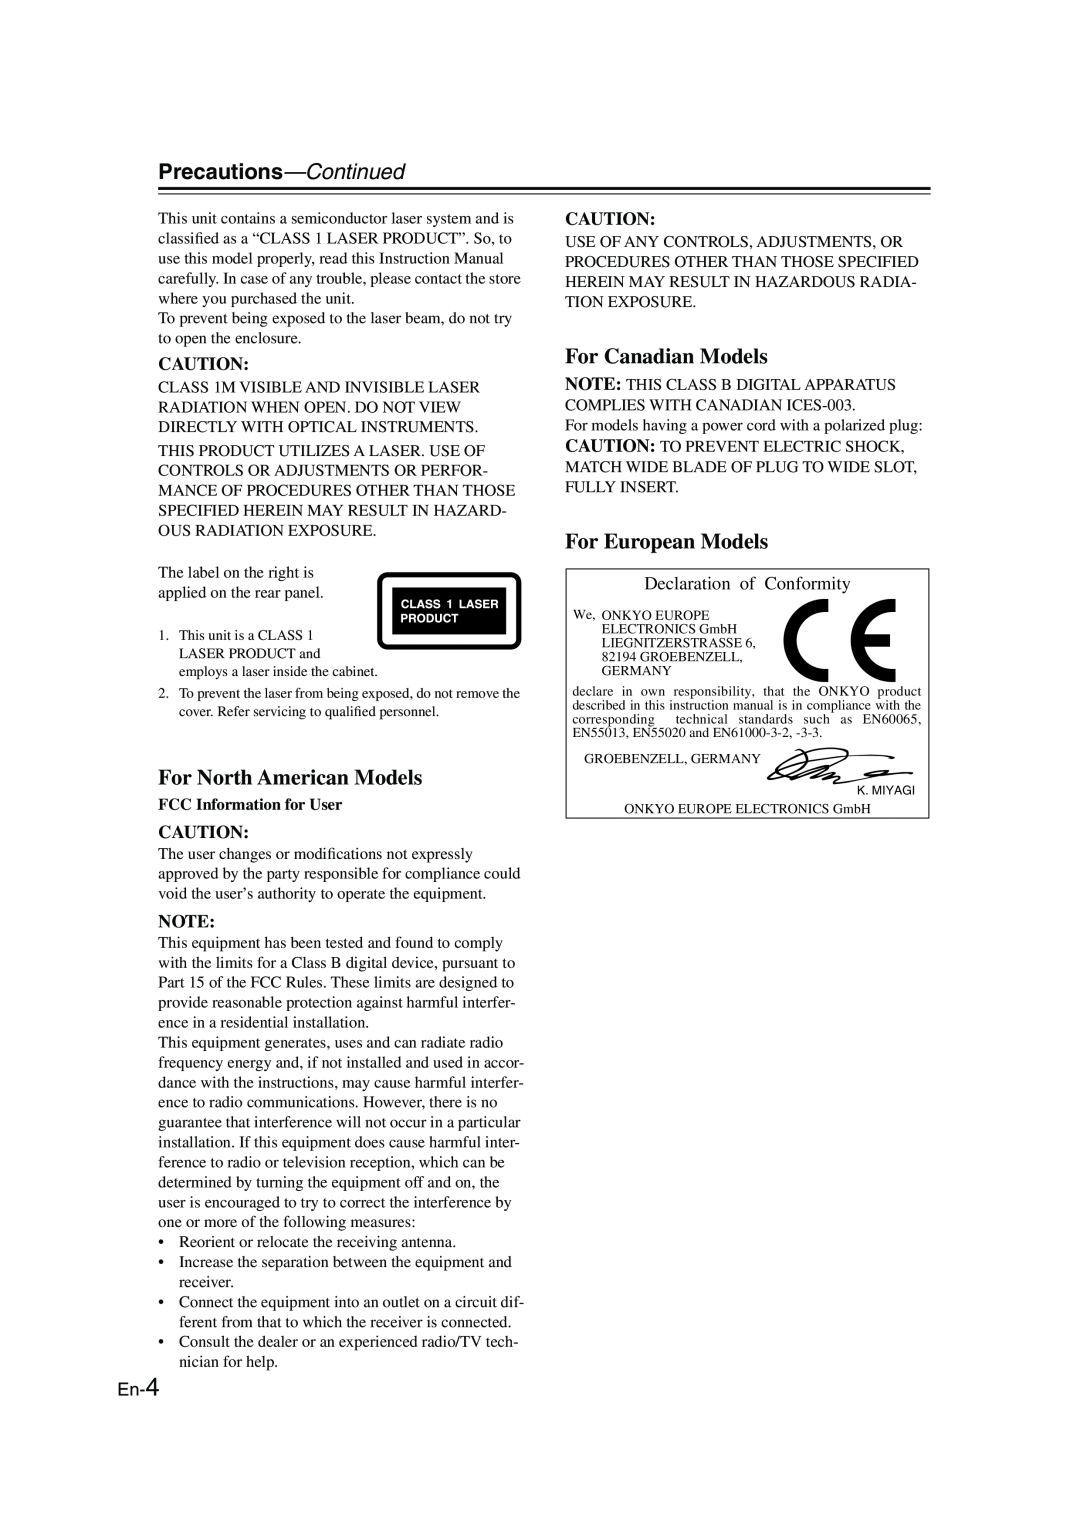 Onkyo CBX-300 Precautions—Continued, For North American Models, For Canadian Models, For European Models, En-4 